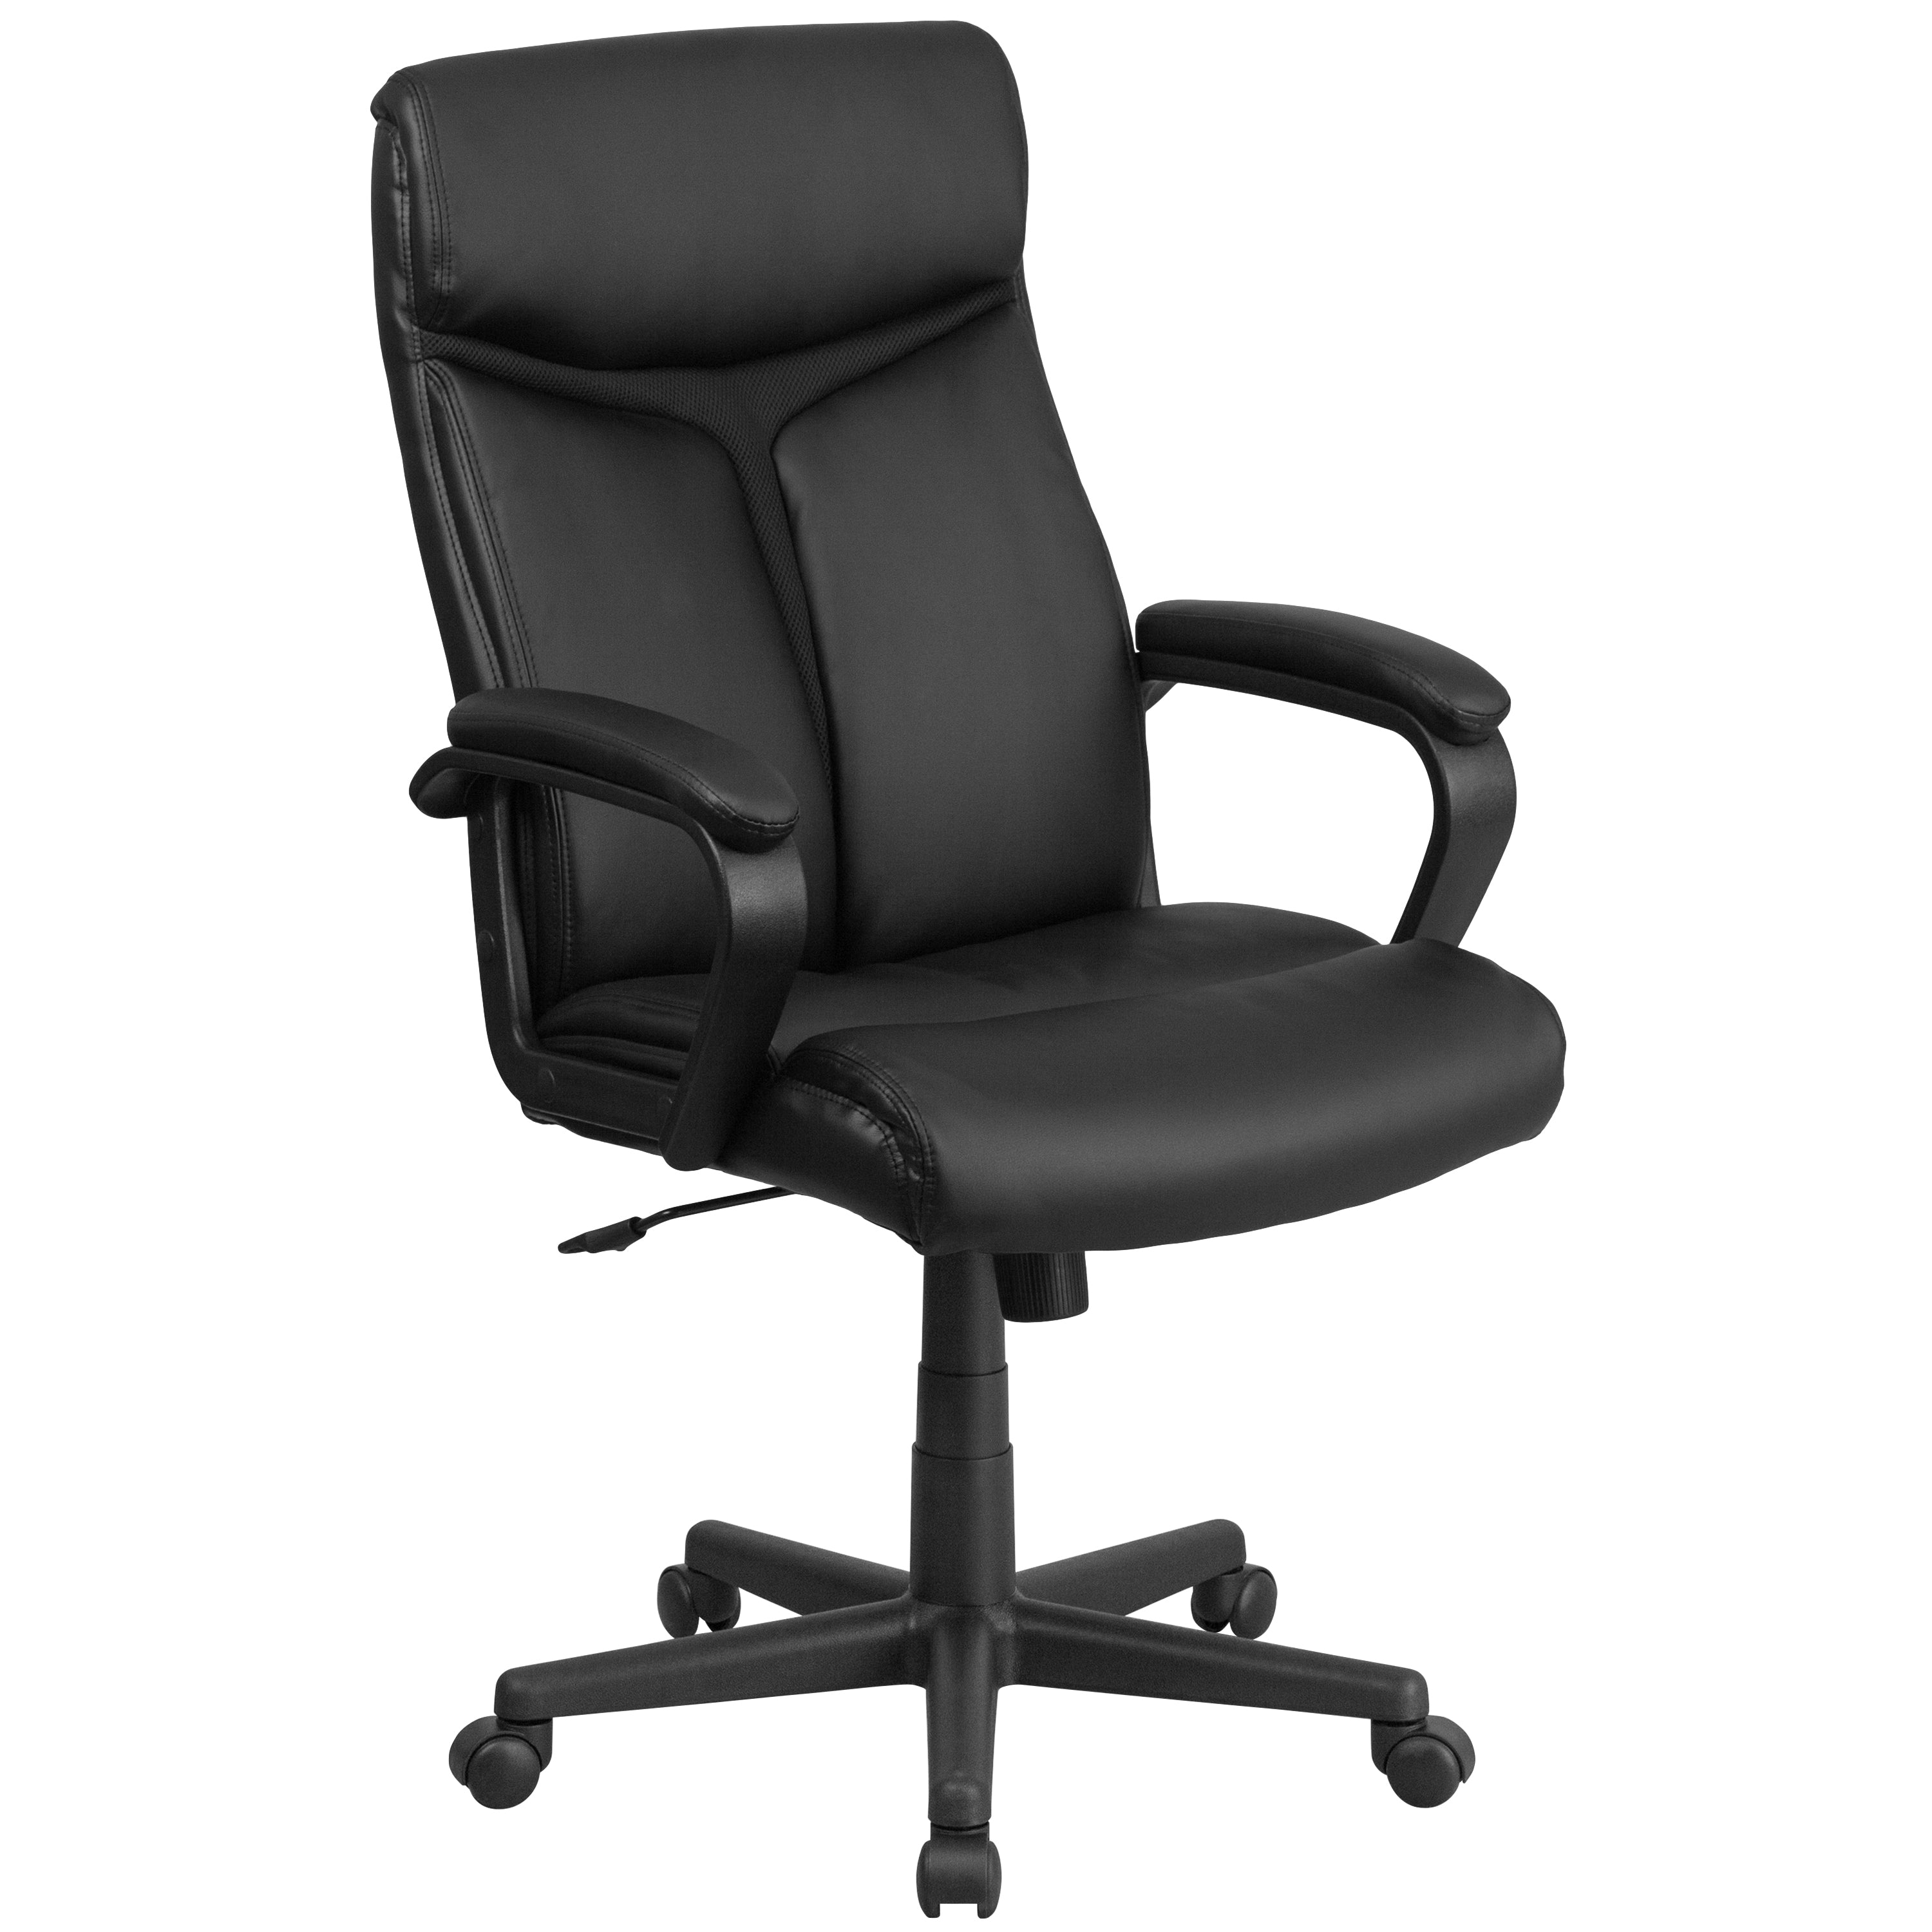 Flash Furniture - Raya Contemporary Leather/Faux Leather Executive Swivel Office Chair - Black